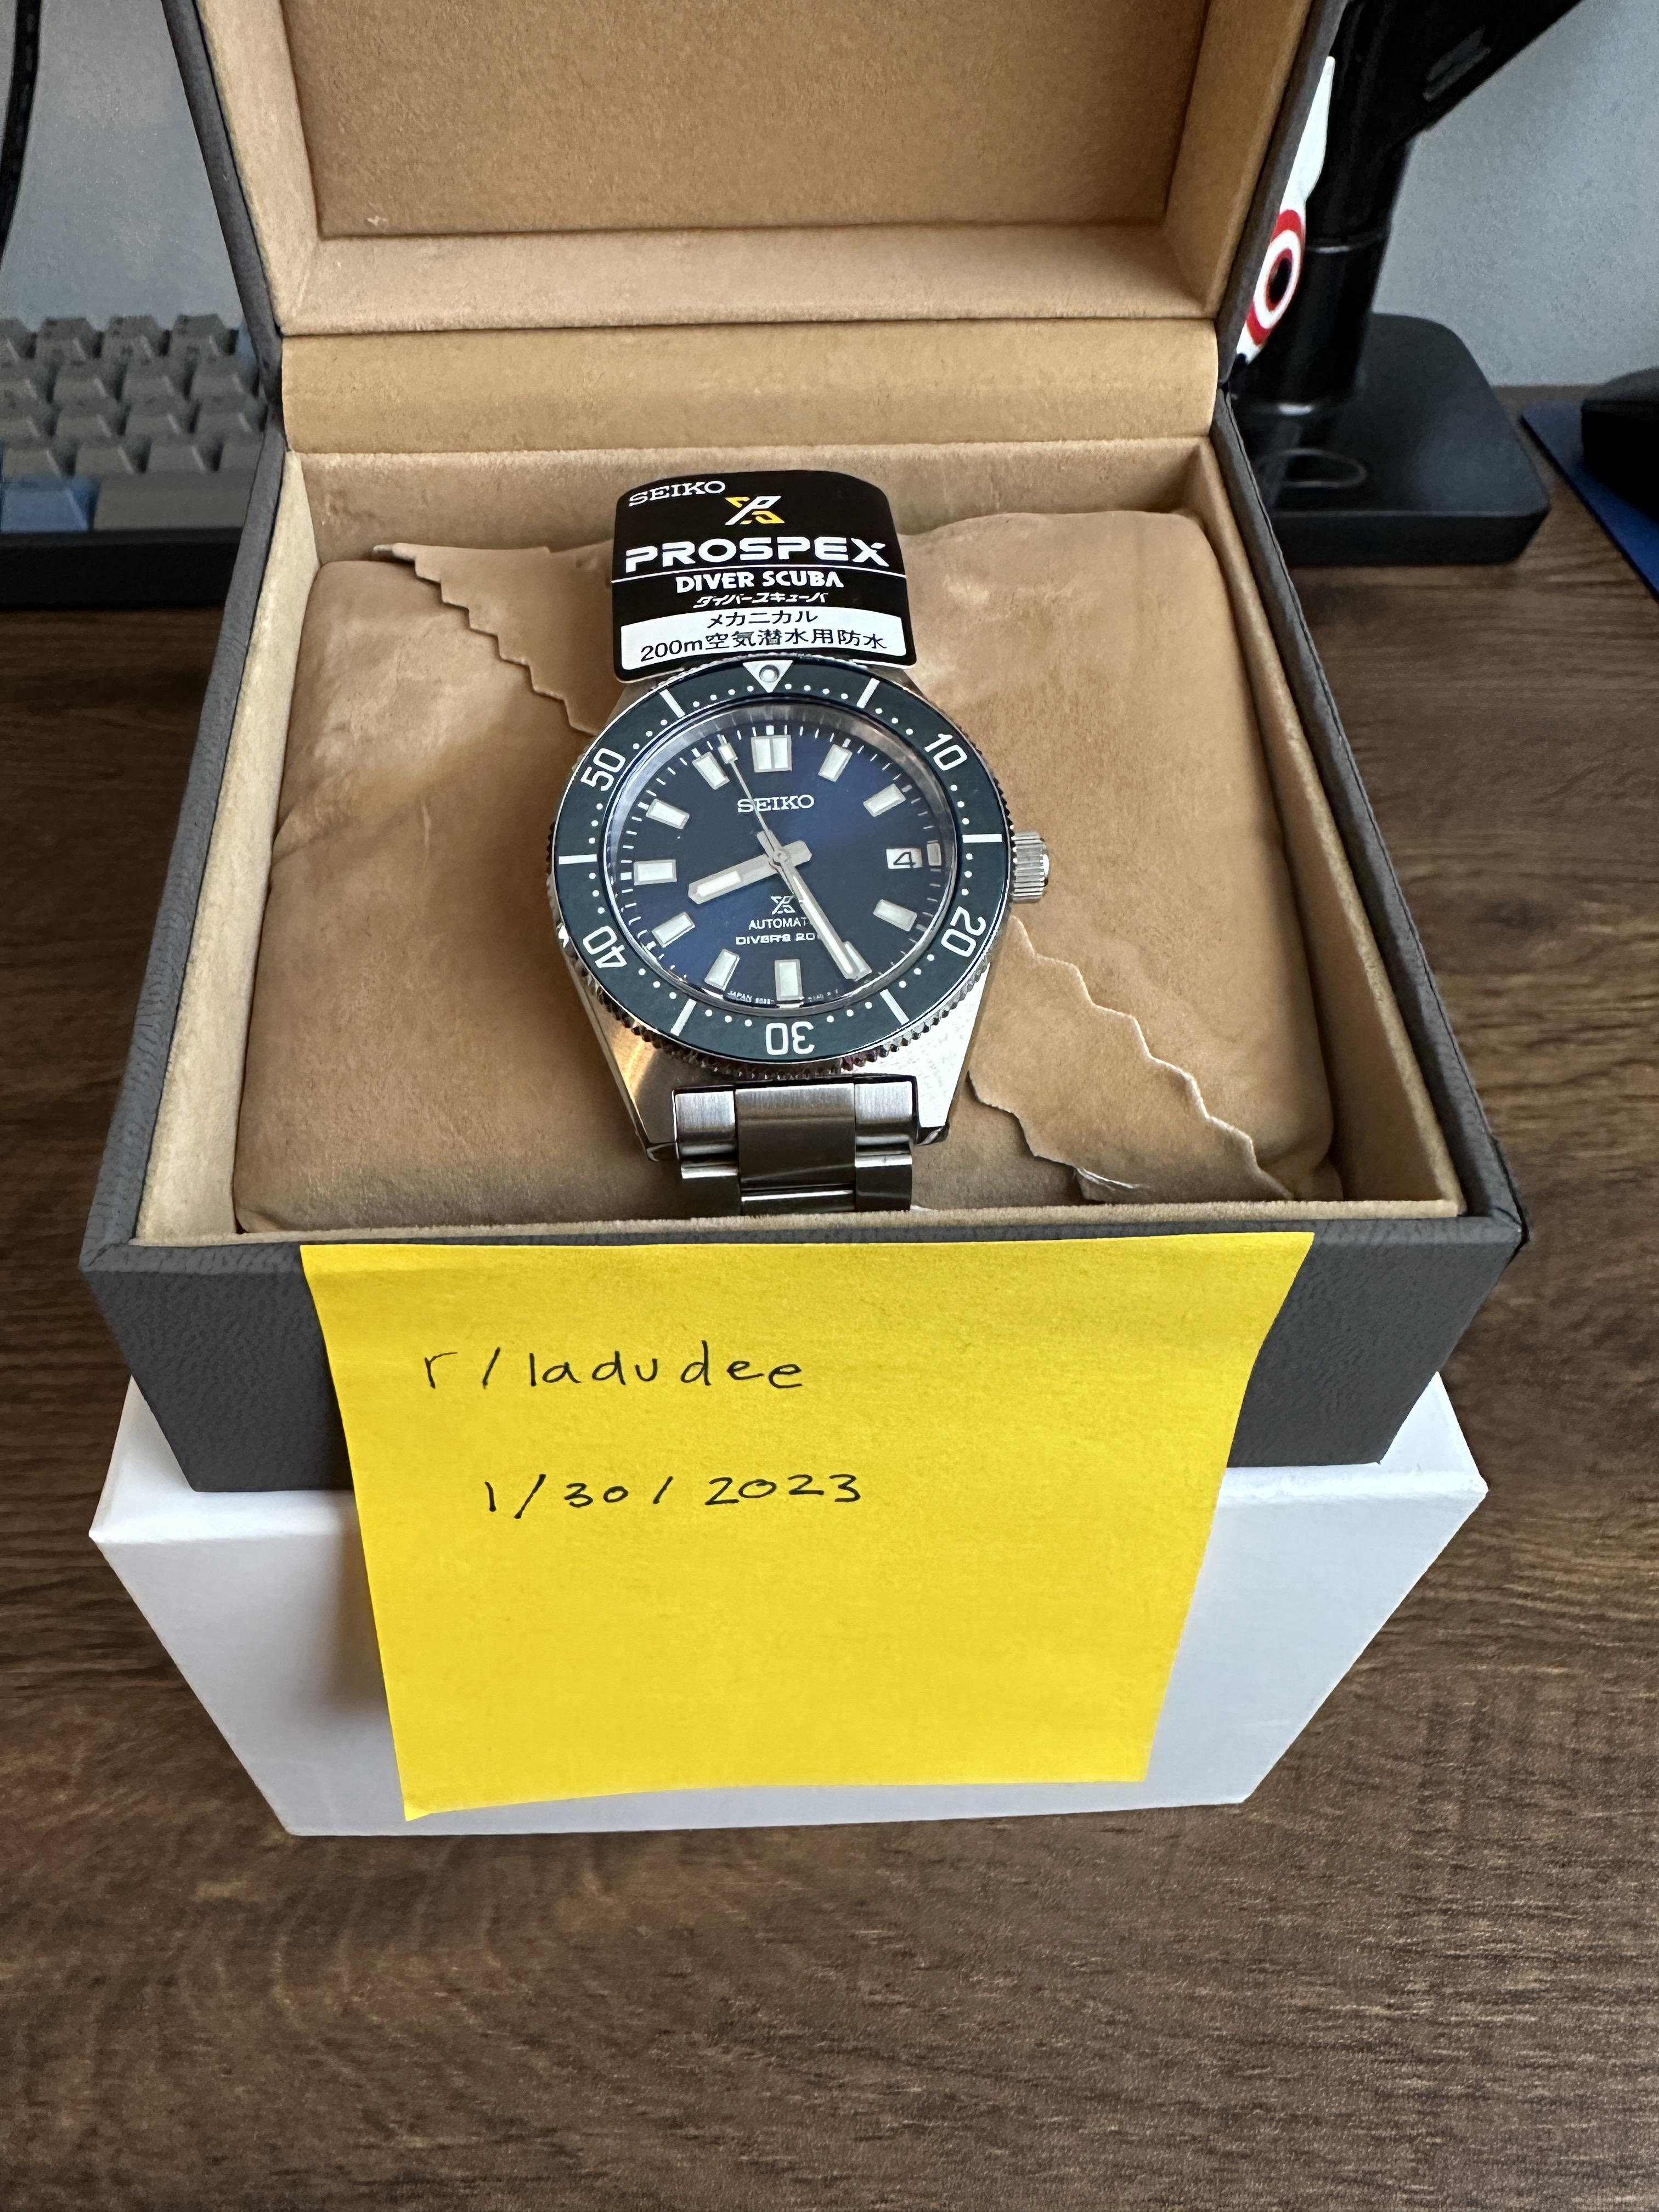 WTS] Seiko Prospex SBDC163 Core Shop Exclusive Brand New With Tags - $1250  | WatchCharts